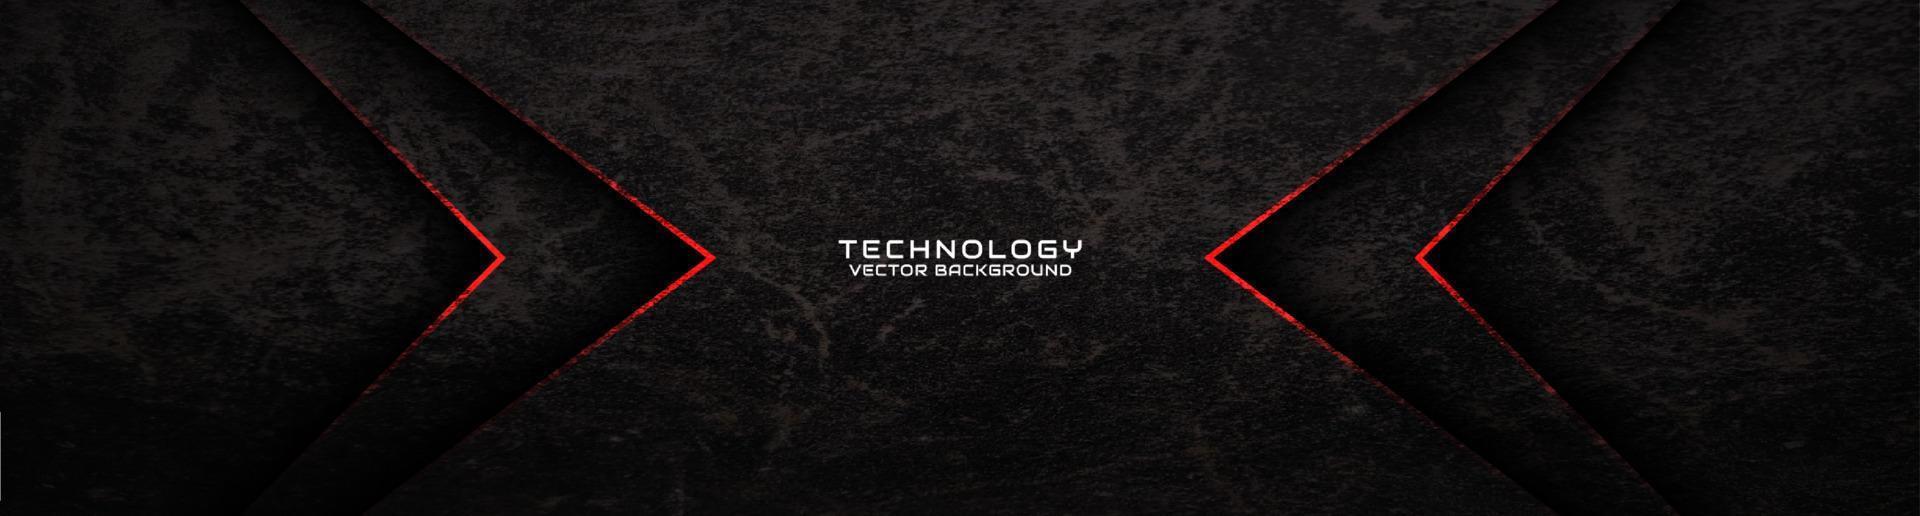 3D black rough grunge techno abstract background overlap layer on dark space with red arrow decoration. Modern graphic design element cutout style concept for banner, flyer, card, or brochure cover vector